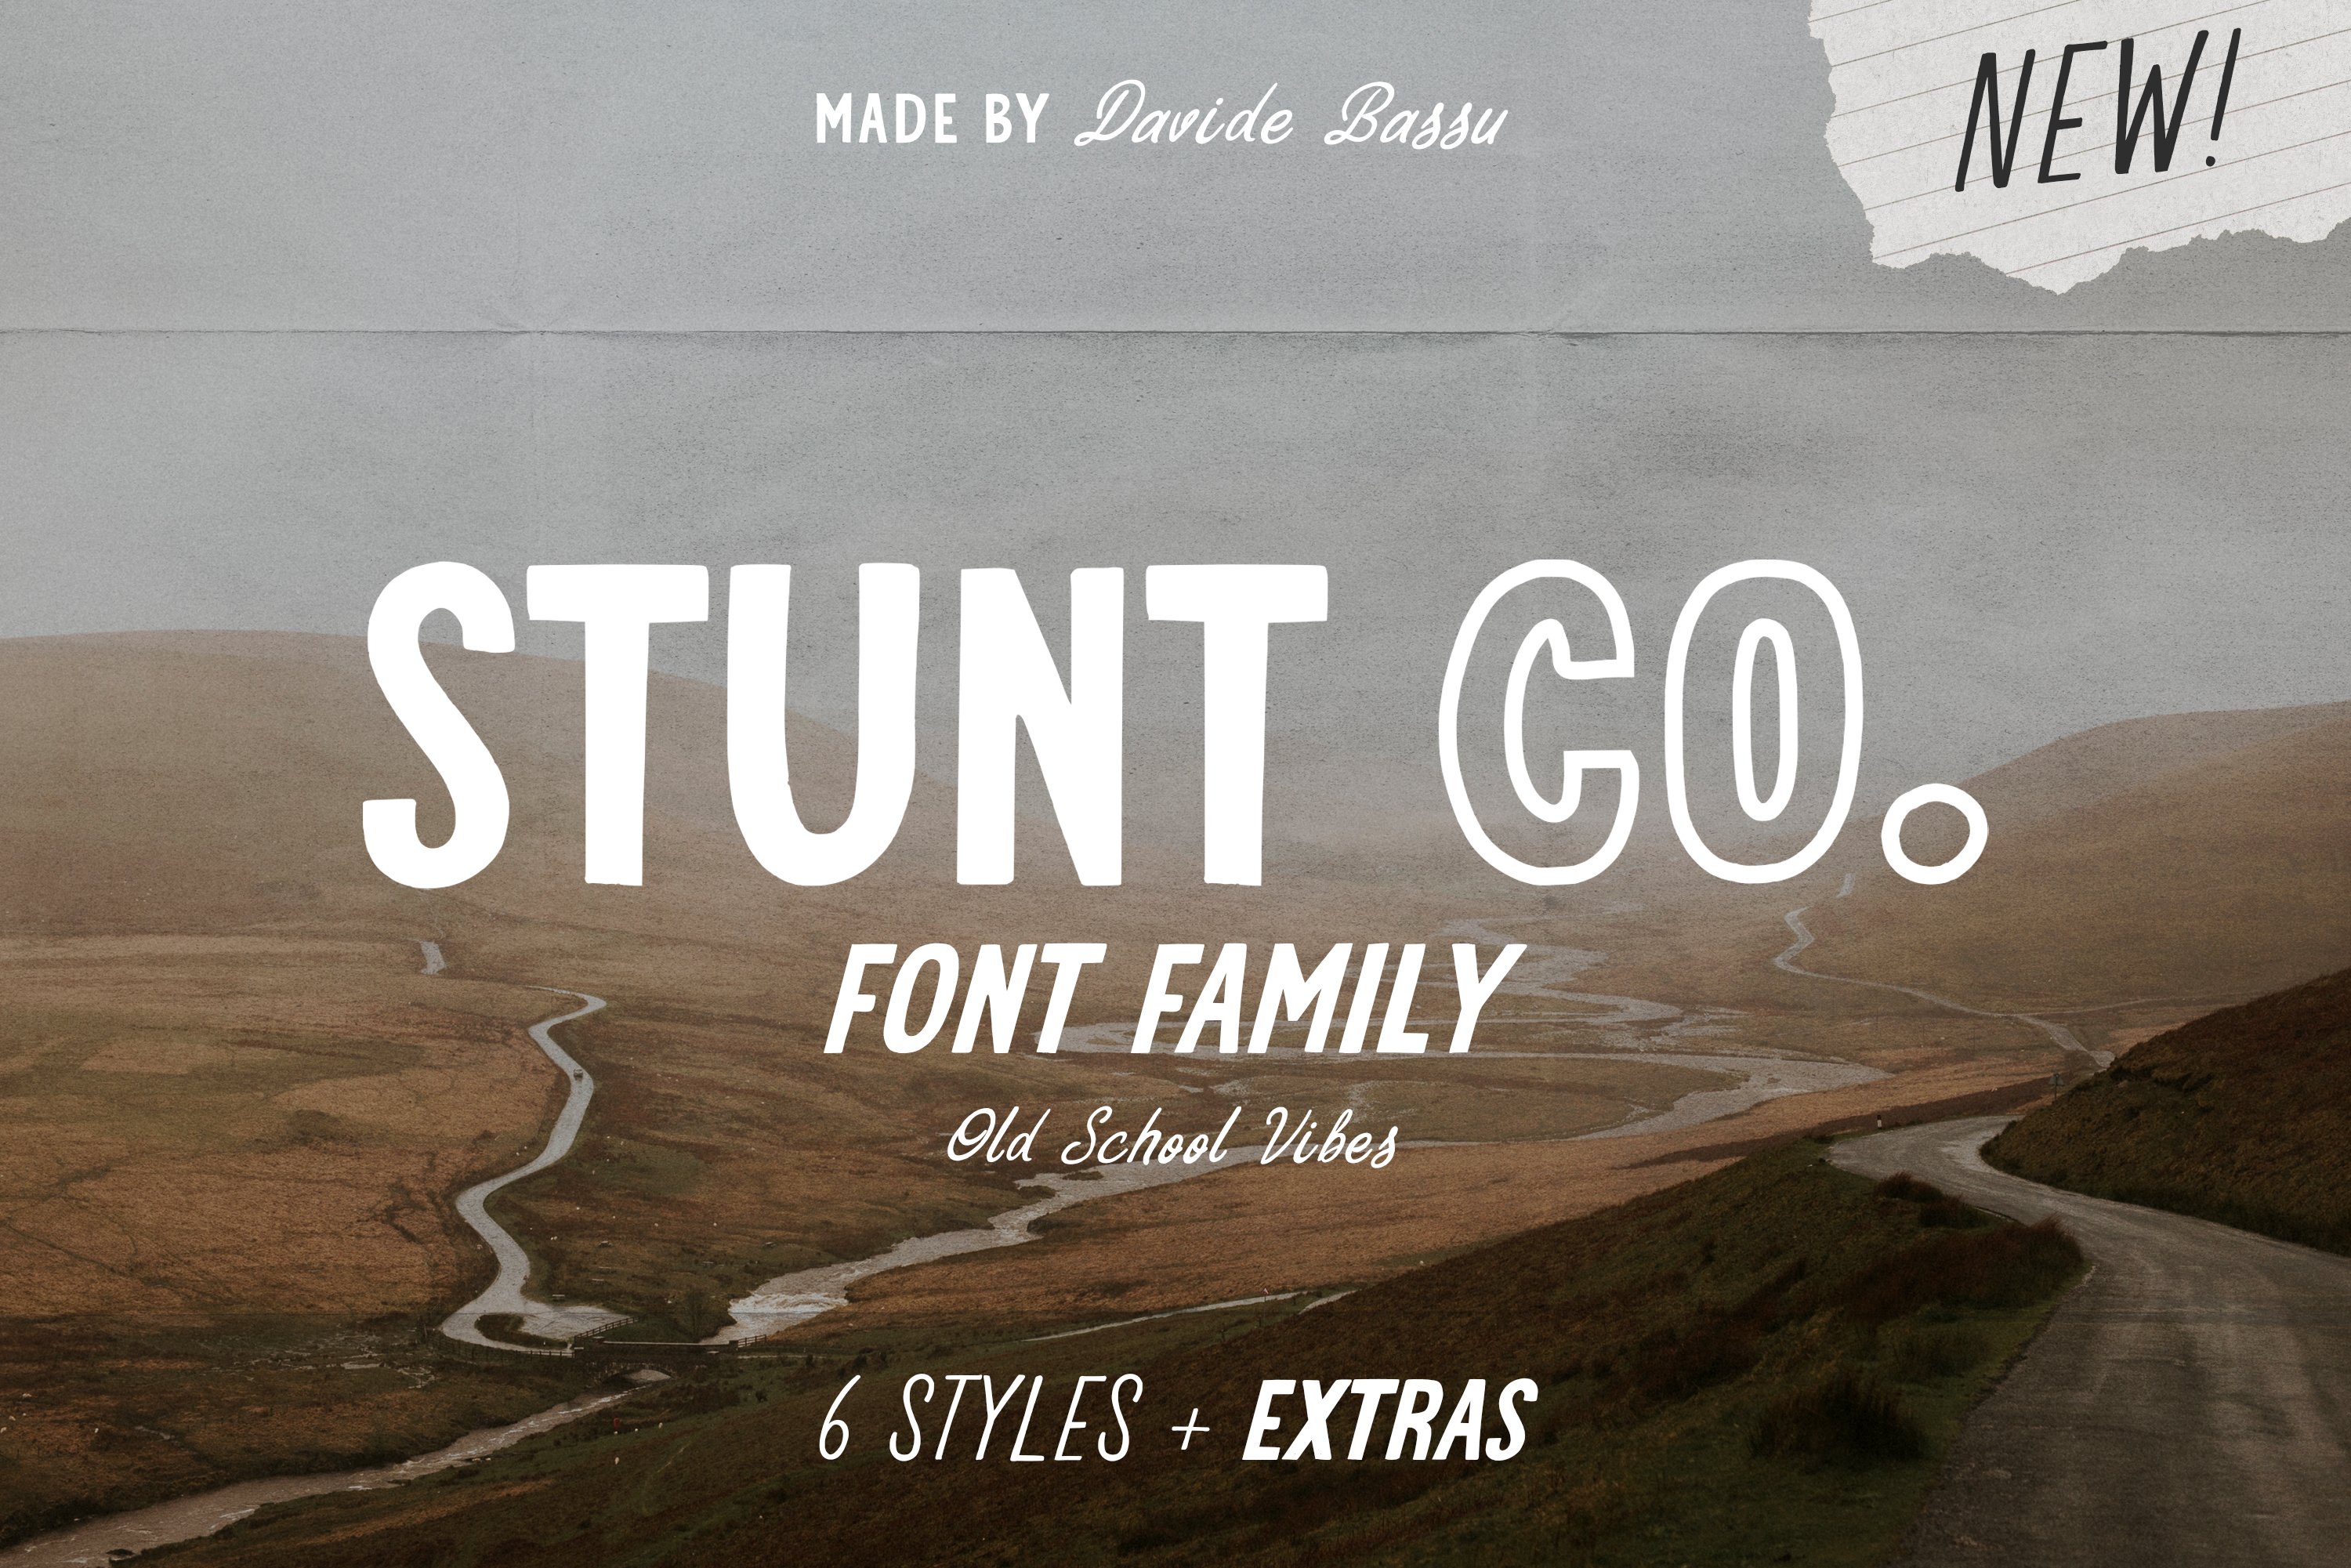 STUNT CO. Font Family + Extracover image.